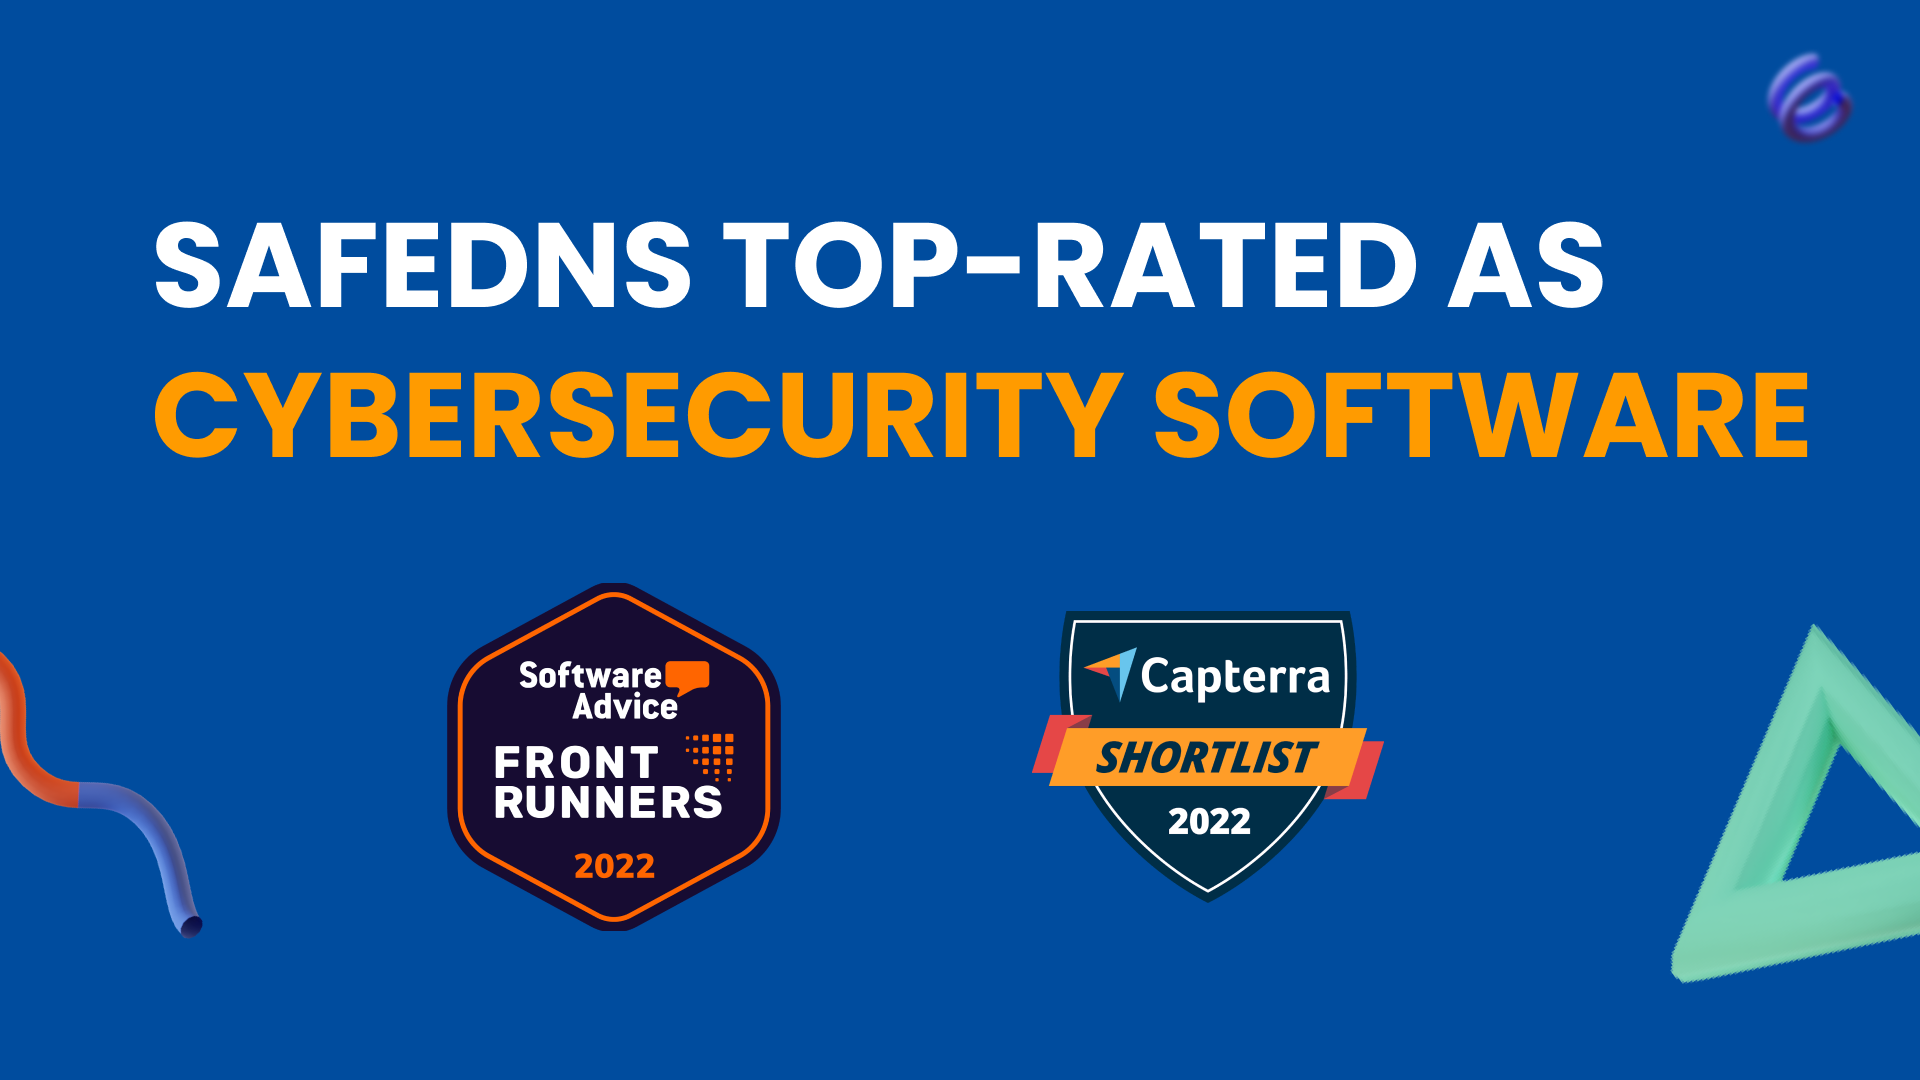 SafeDNS named top-rated cybersecurity software